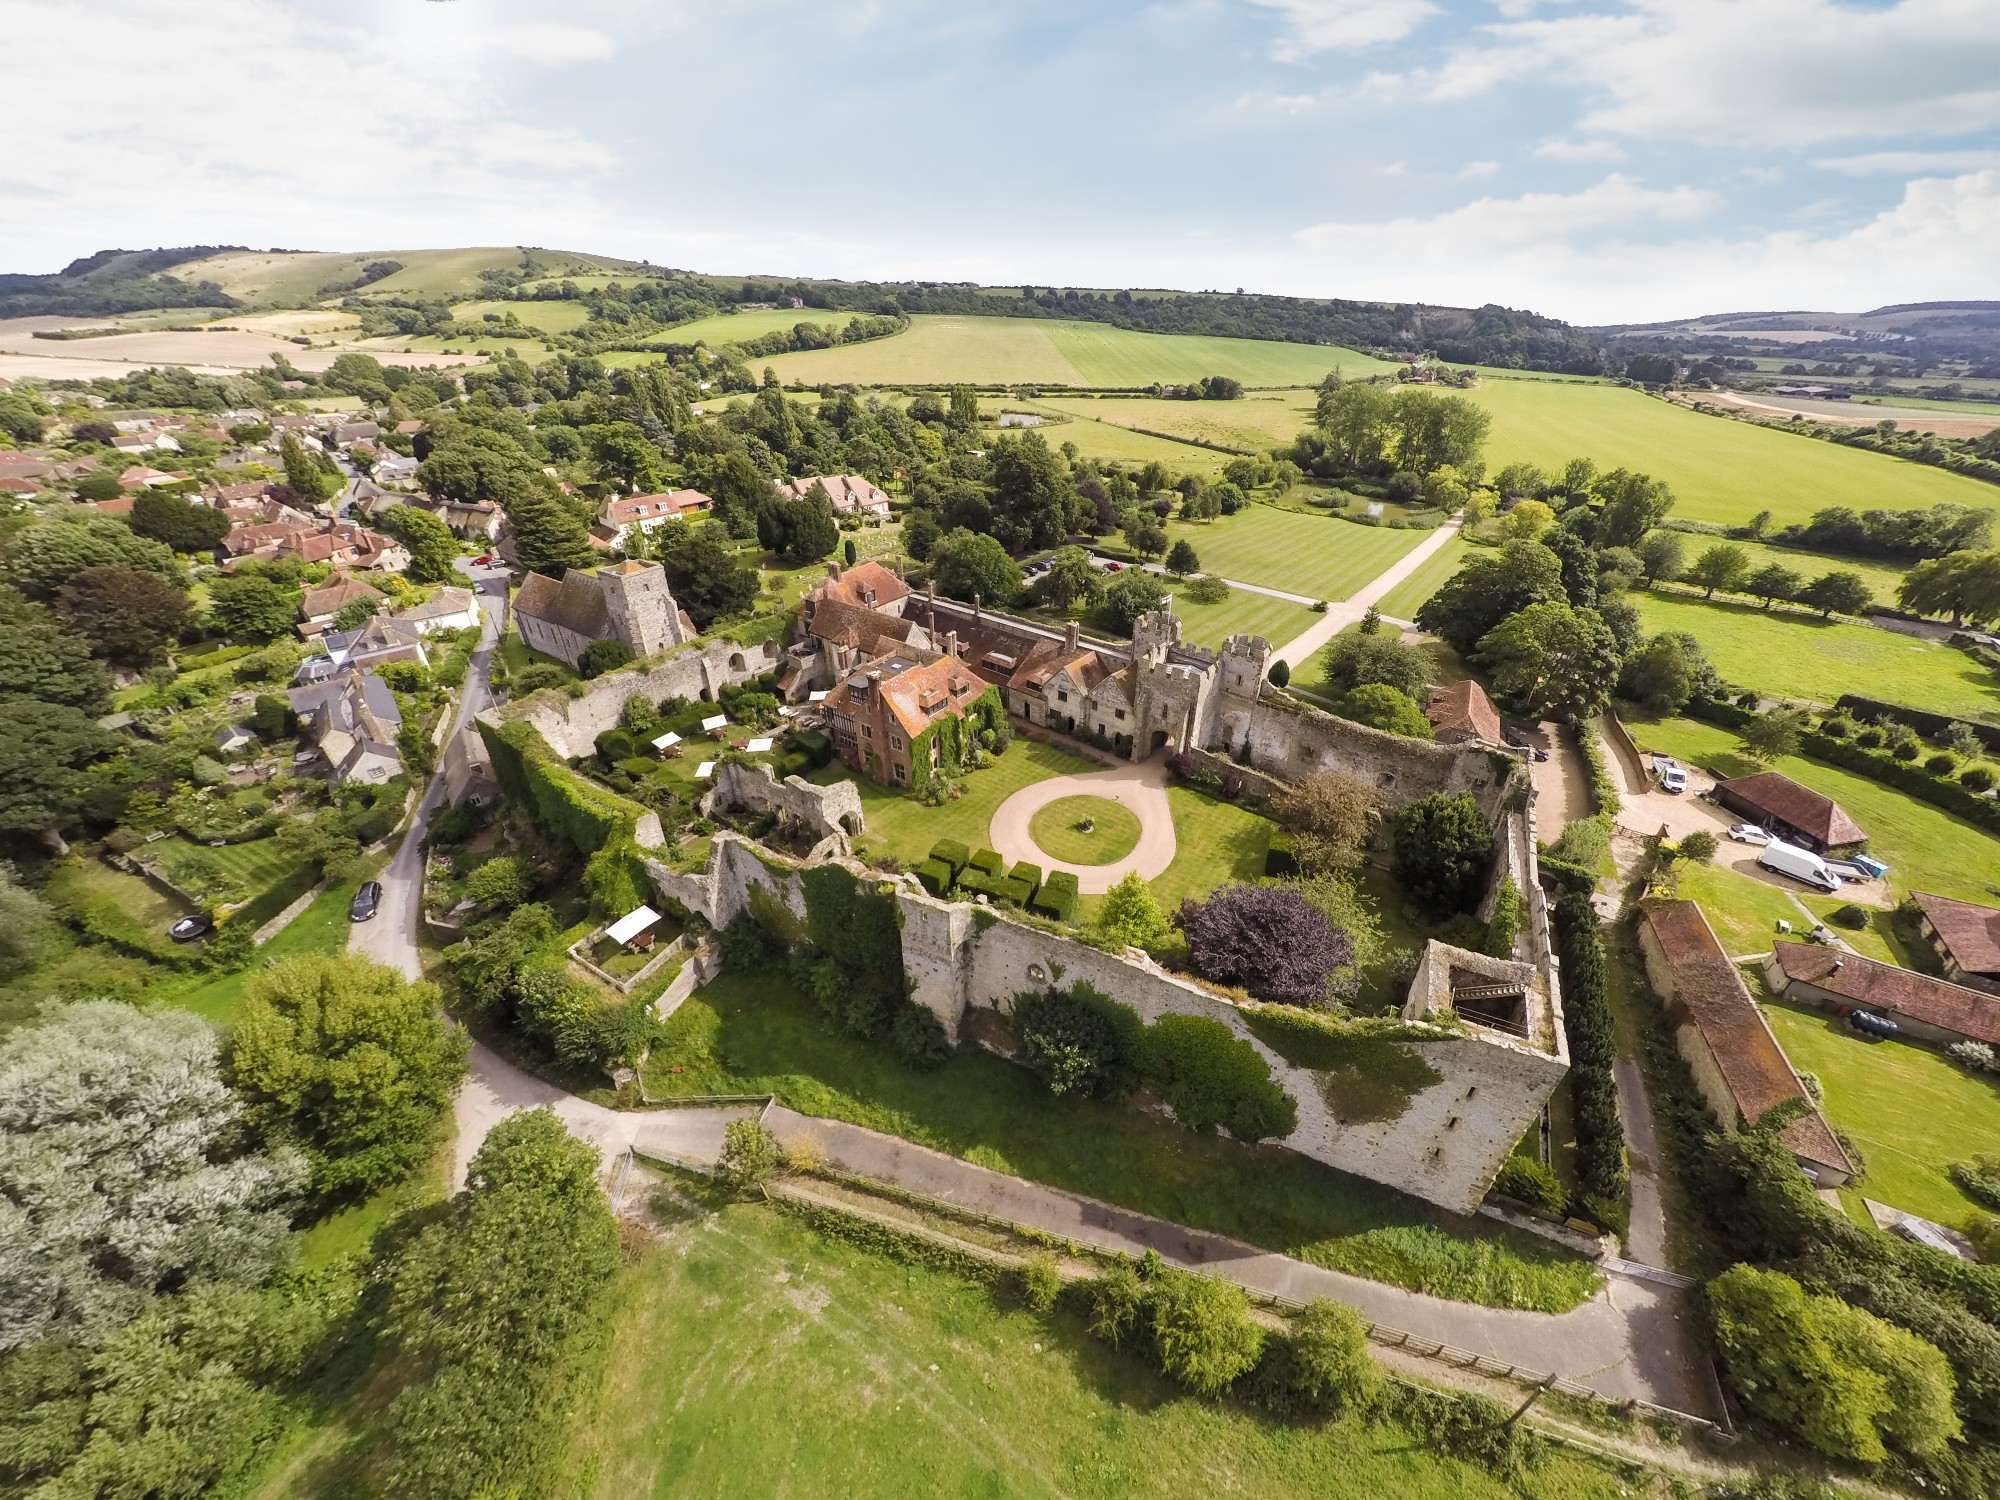 A bird’s-eye view of Amberley Castle, one of several mansions refurbished and restored to their former glory.